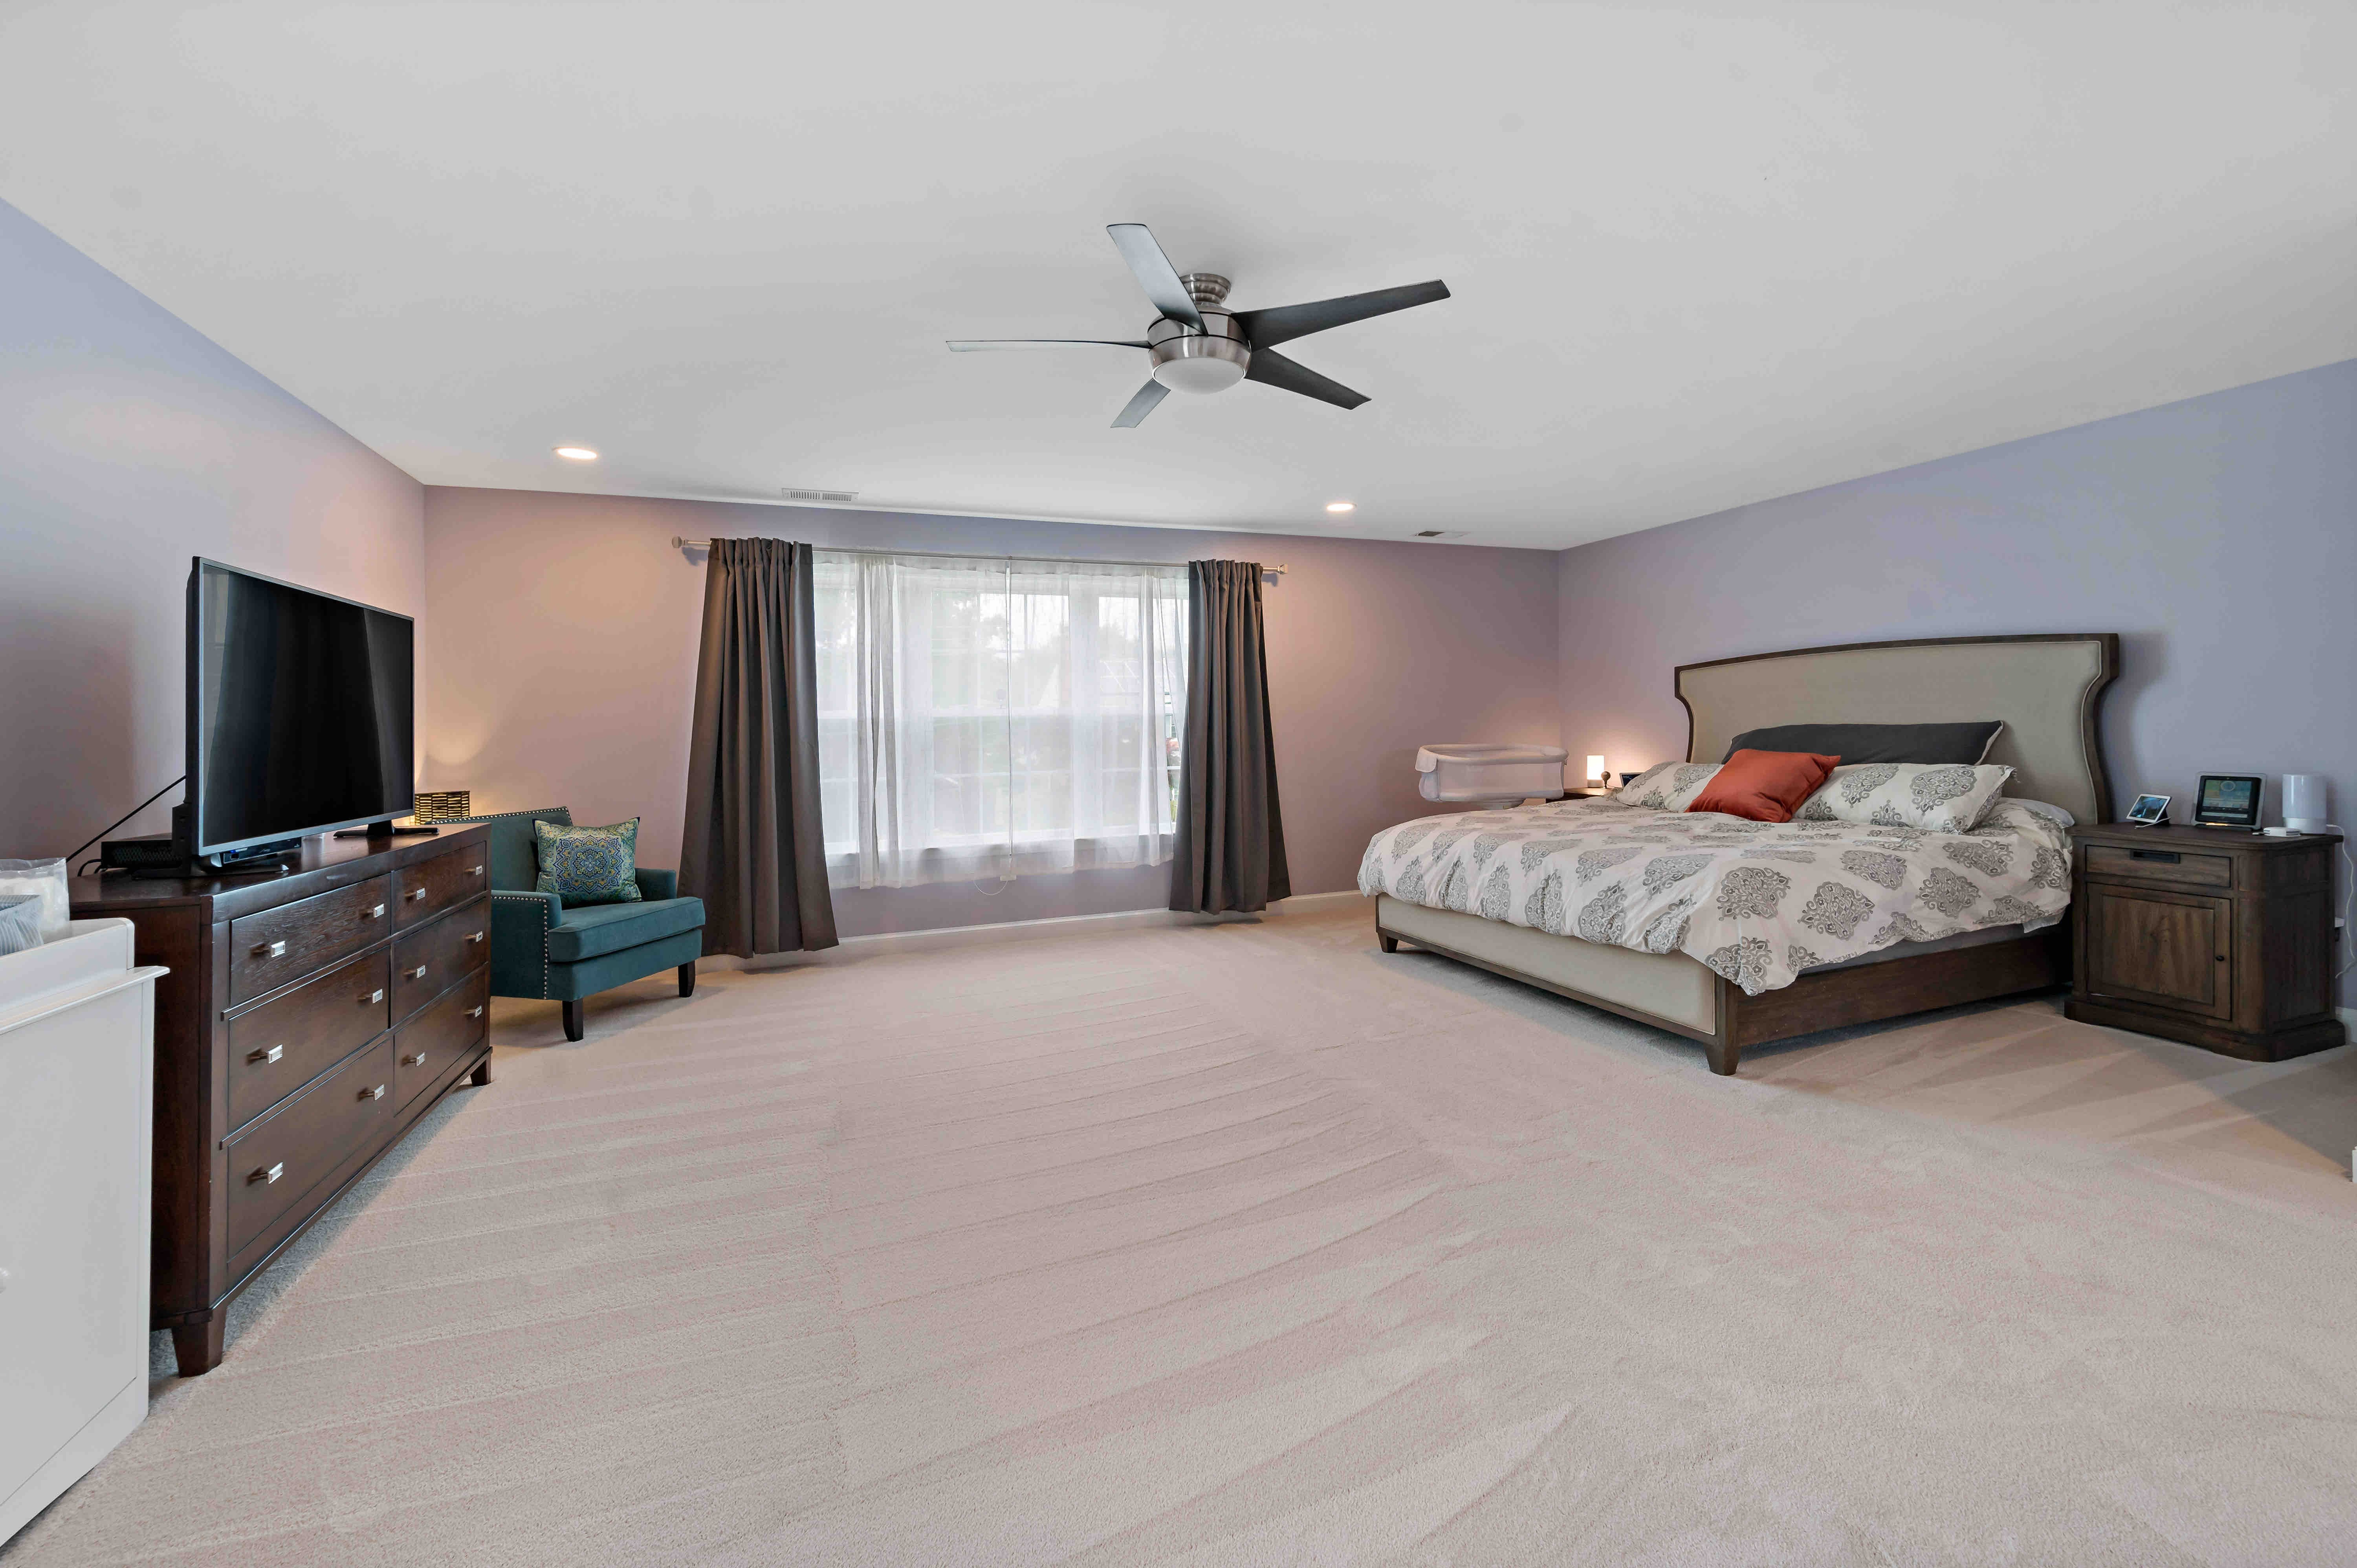 Window treatment and carpeted floors in bedroom